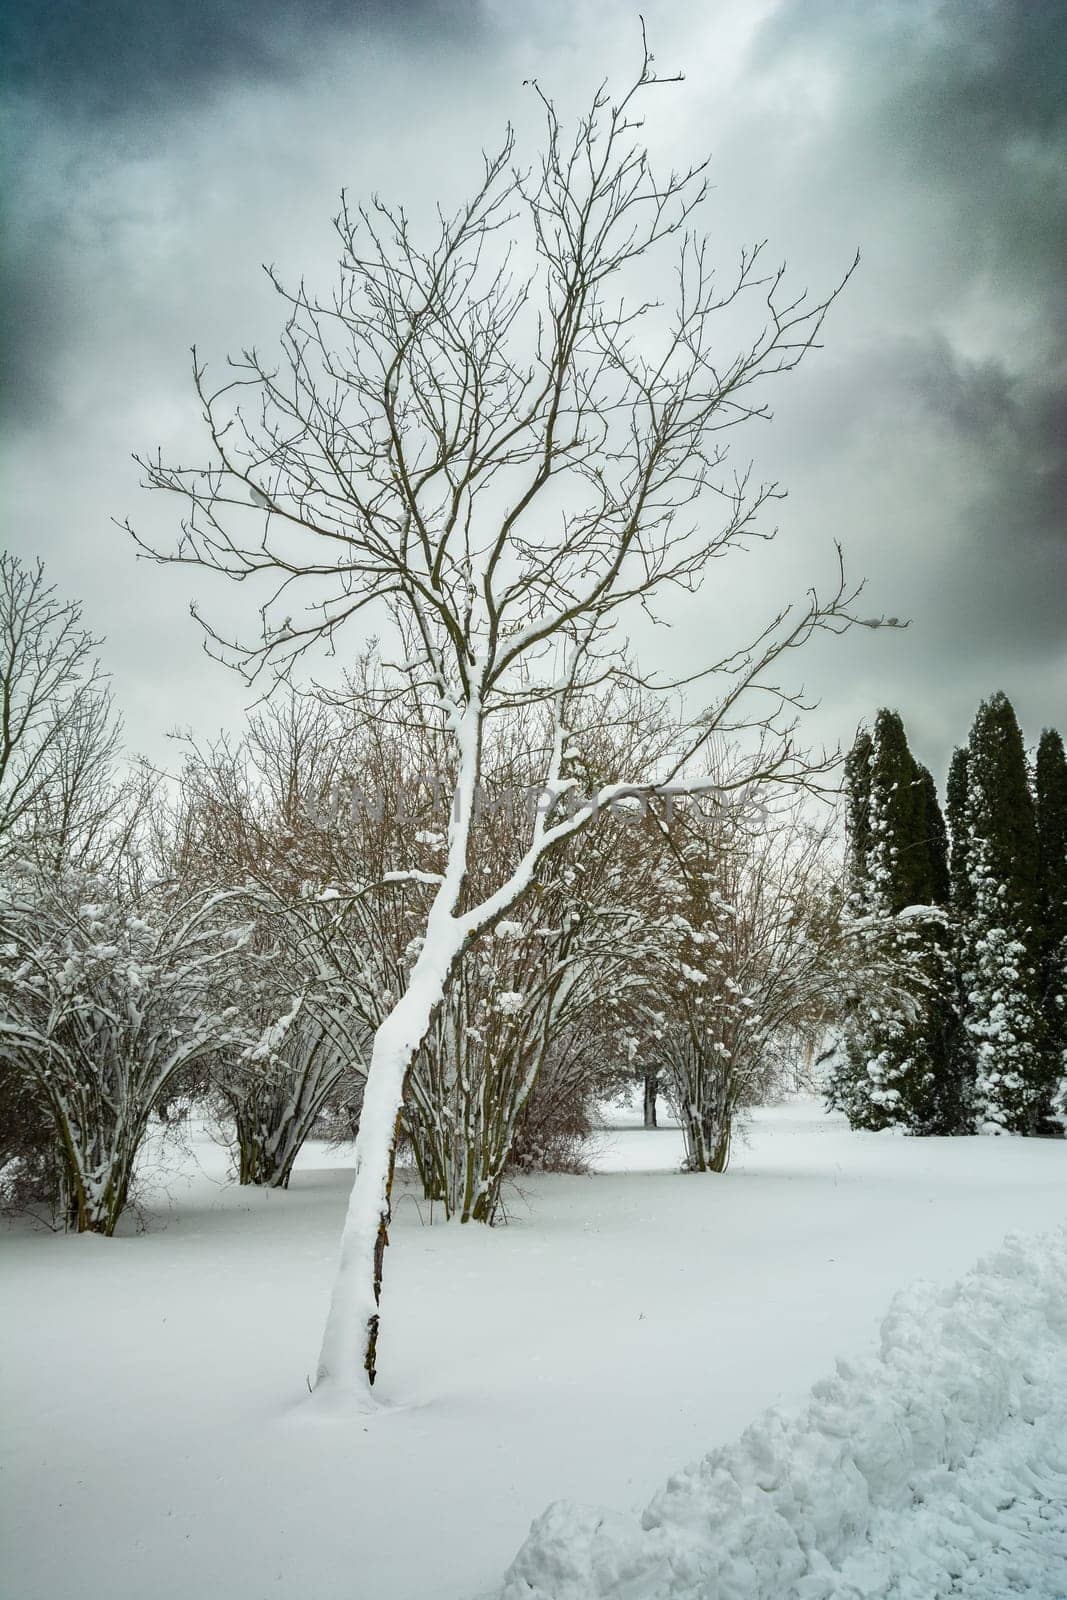 Snow-covered tree and bushes on a cloudy winter day by darekb22